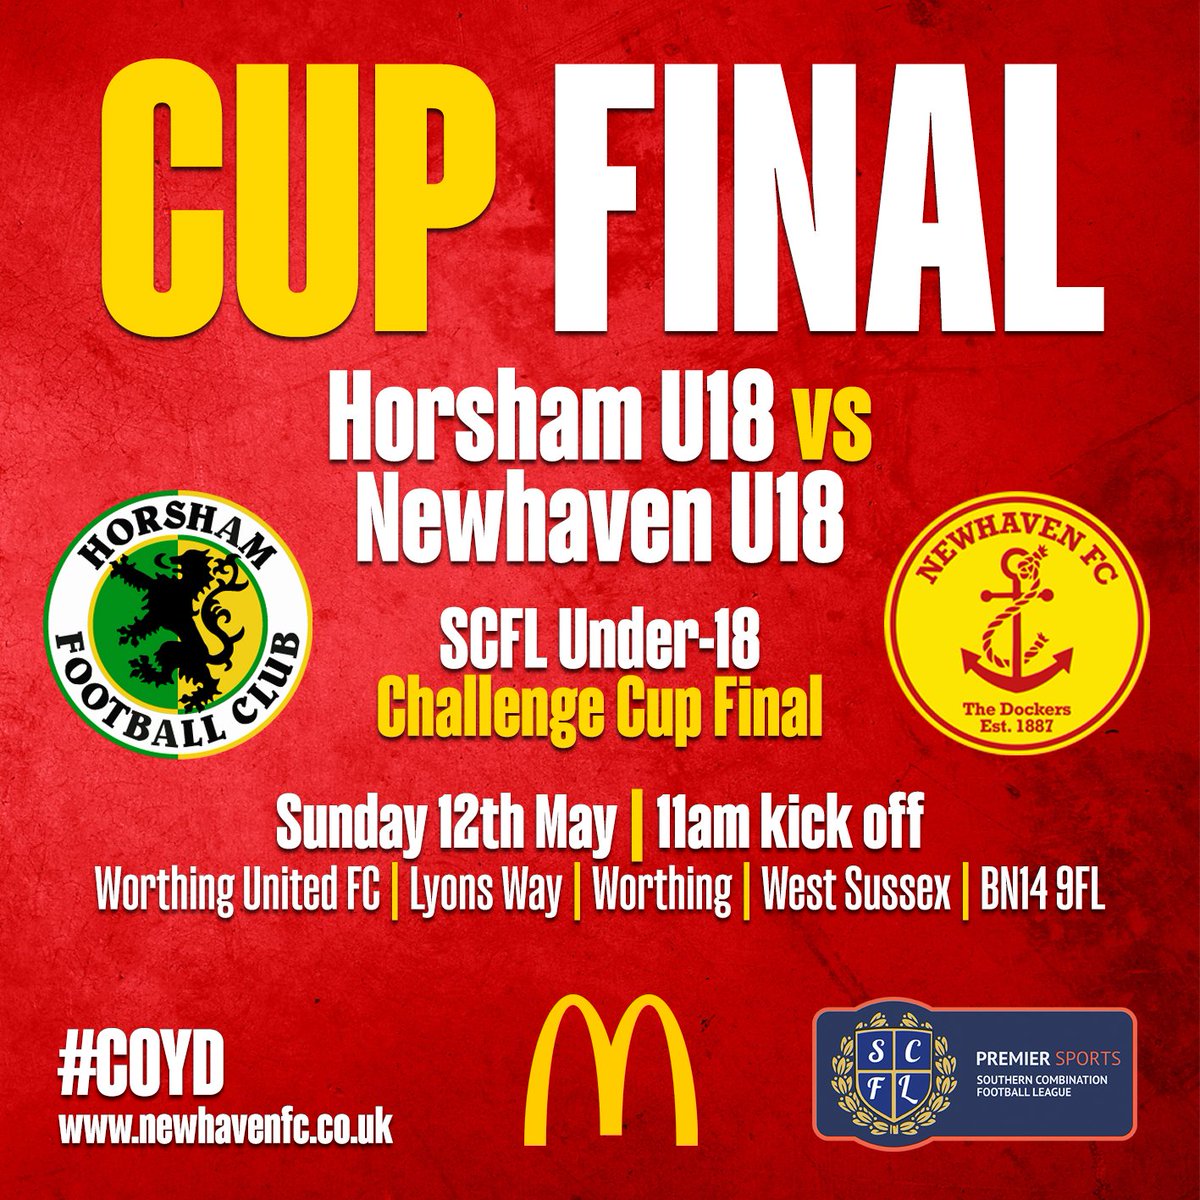 🏆 𝗨𝟭𝟴 𝗖𝘂𝗽 𝗙𝗶𝗻𝗮𝗹! This weekend, our Under-18s continue the defence of their @TheSCFL U18 Challenge Cup as they take on @HorshamFC in the final on Sunday morning. The game is being played at @WorthingUtdFC and will kick off at 11am. #COYD